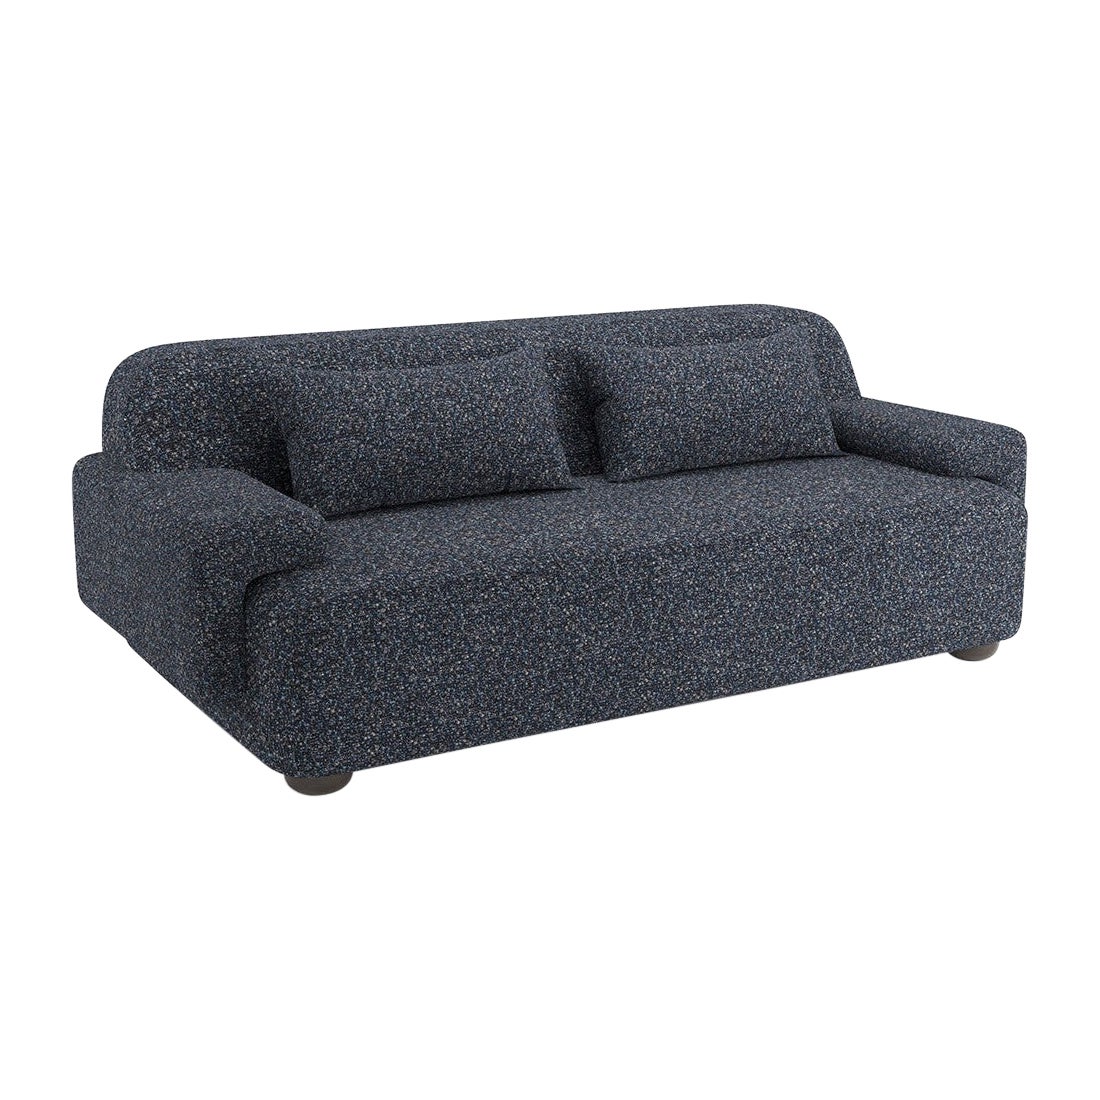 Popus Editions Lena 3 Seater Sofa in Thunderstorm Zanzi Linen & Wool Blend  For Sale